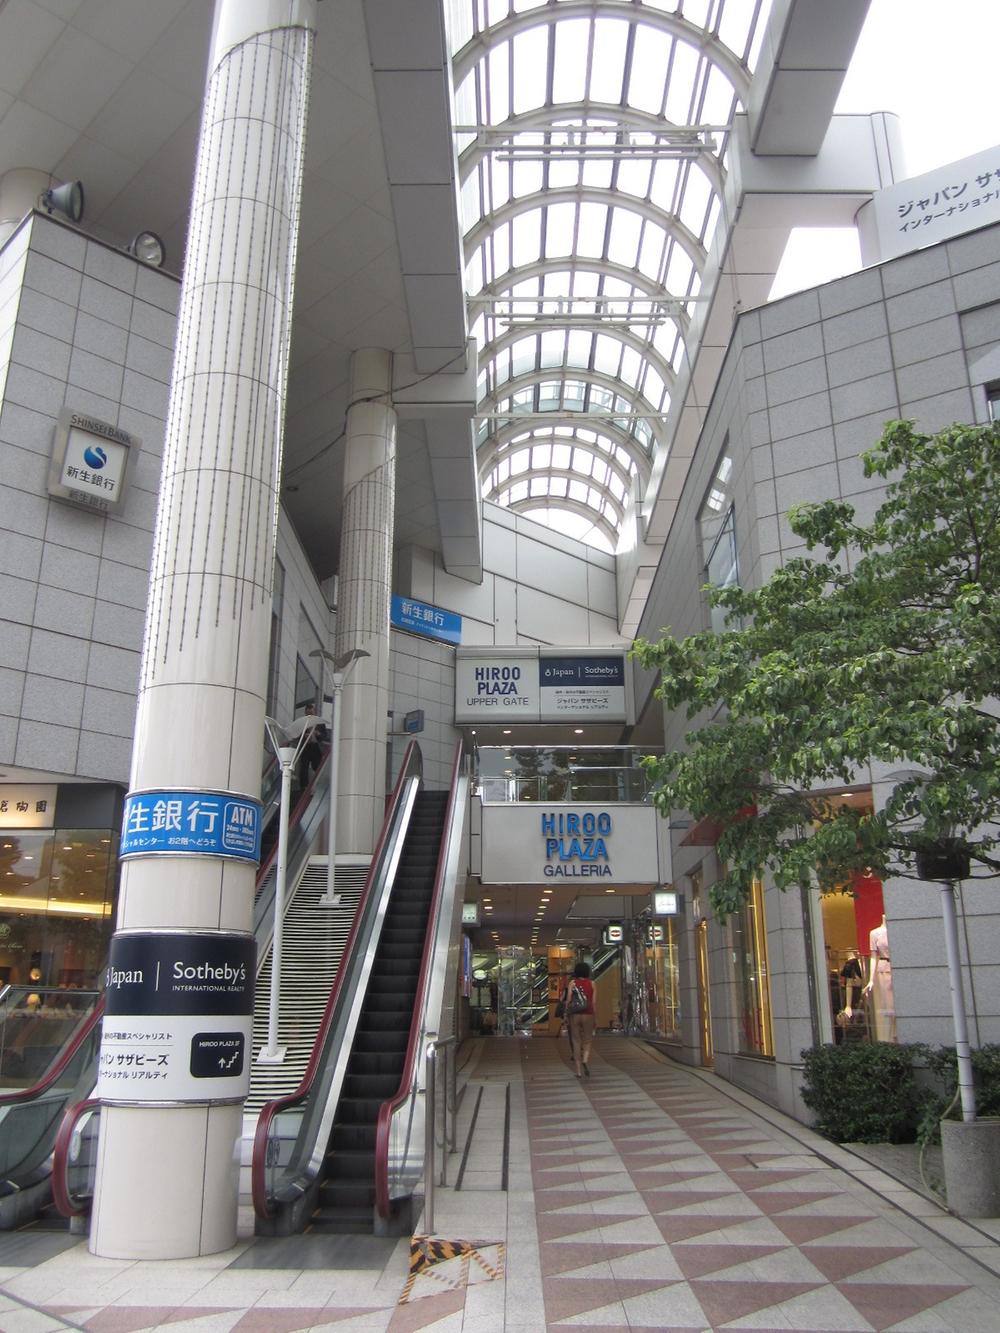 Streets around. Hiroo Station Hiroo Plaza It entered a supermarket and shops, such as YA during.